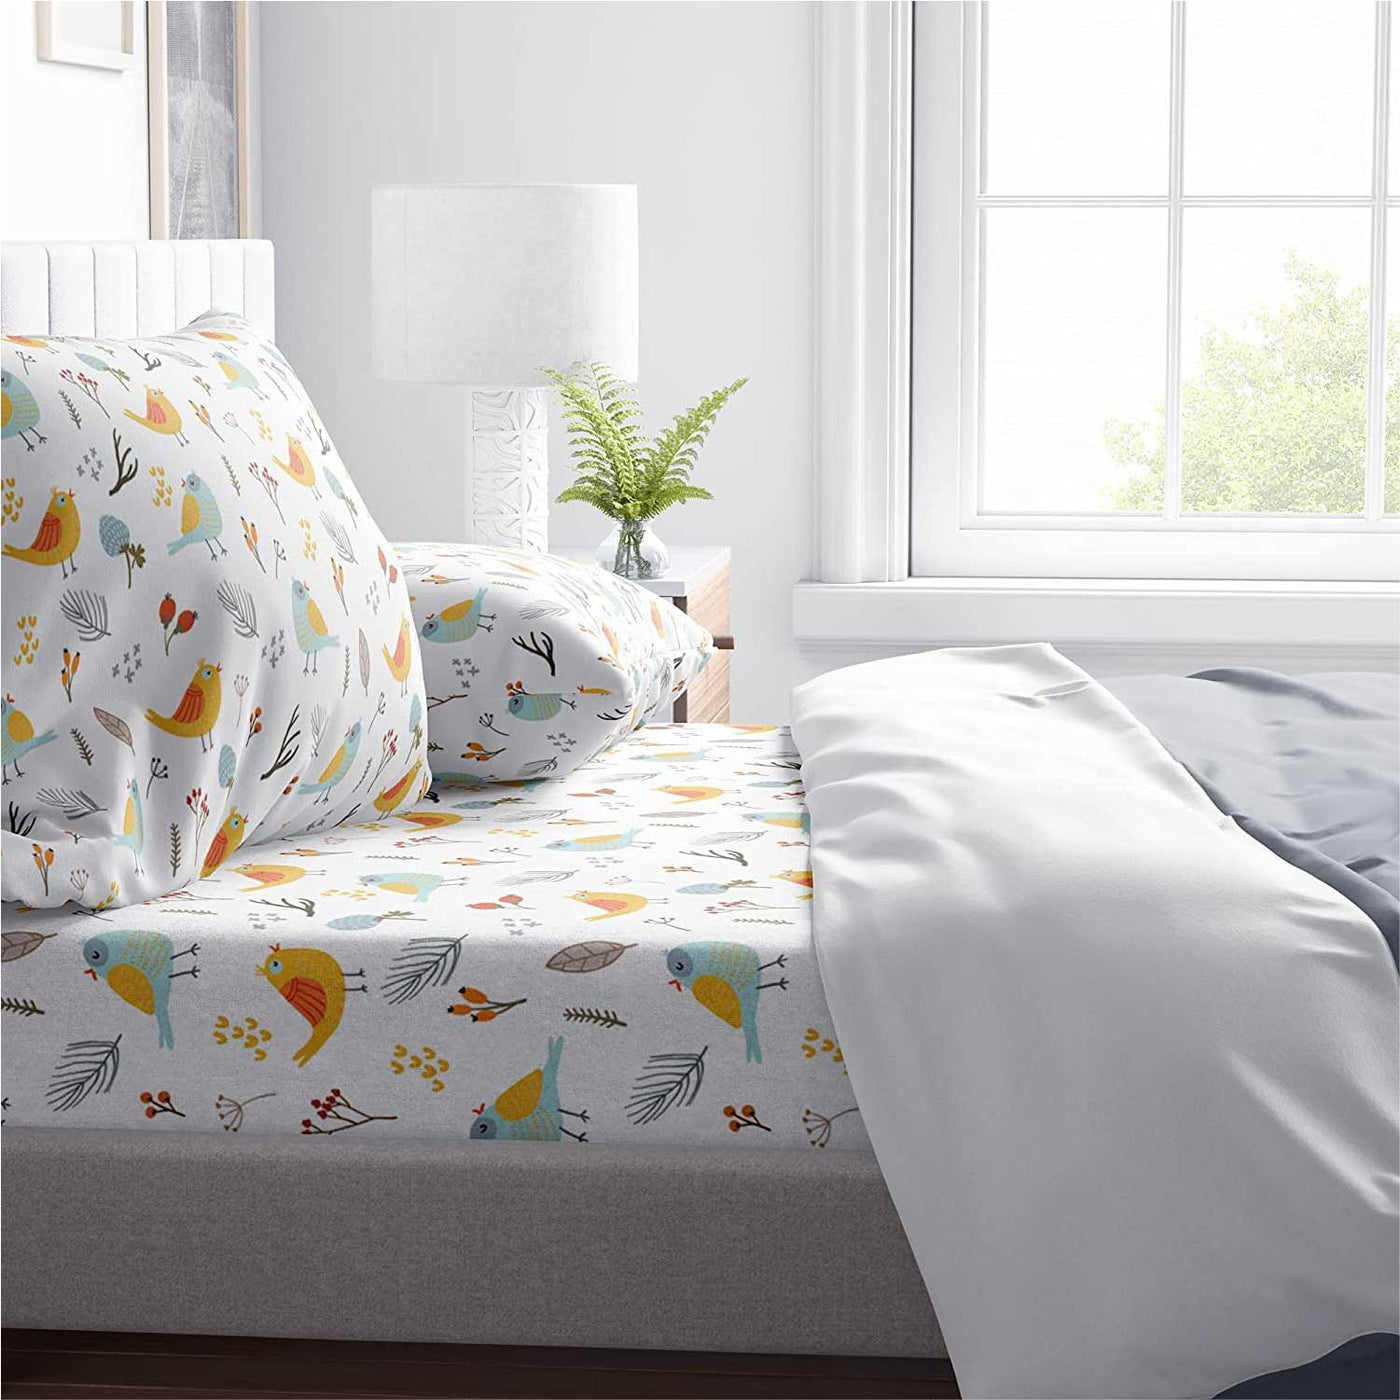 Printed 300 TC Egyptian Cotton Fitted Bed Sheet Set - Forest Birds